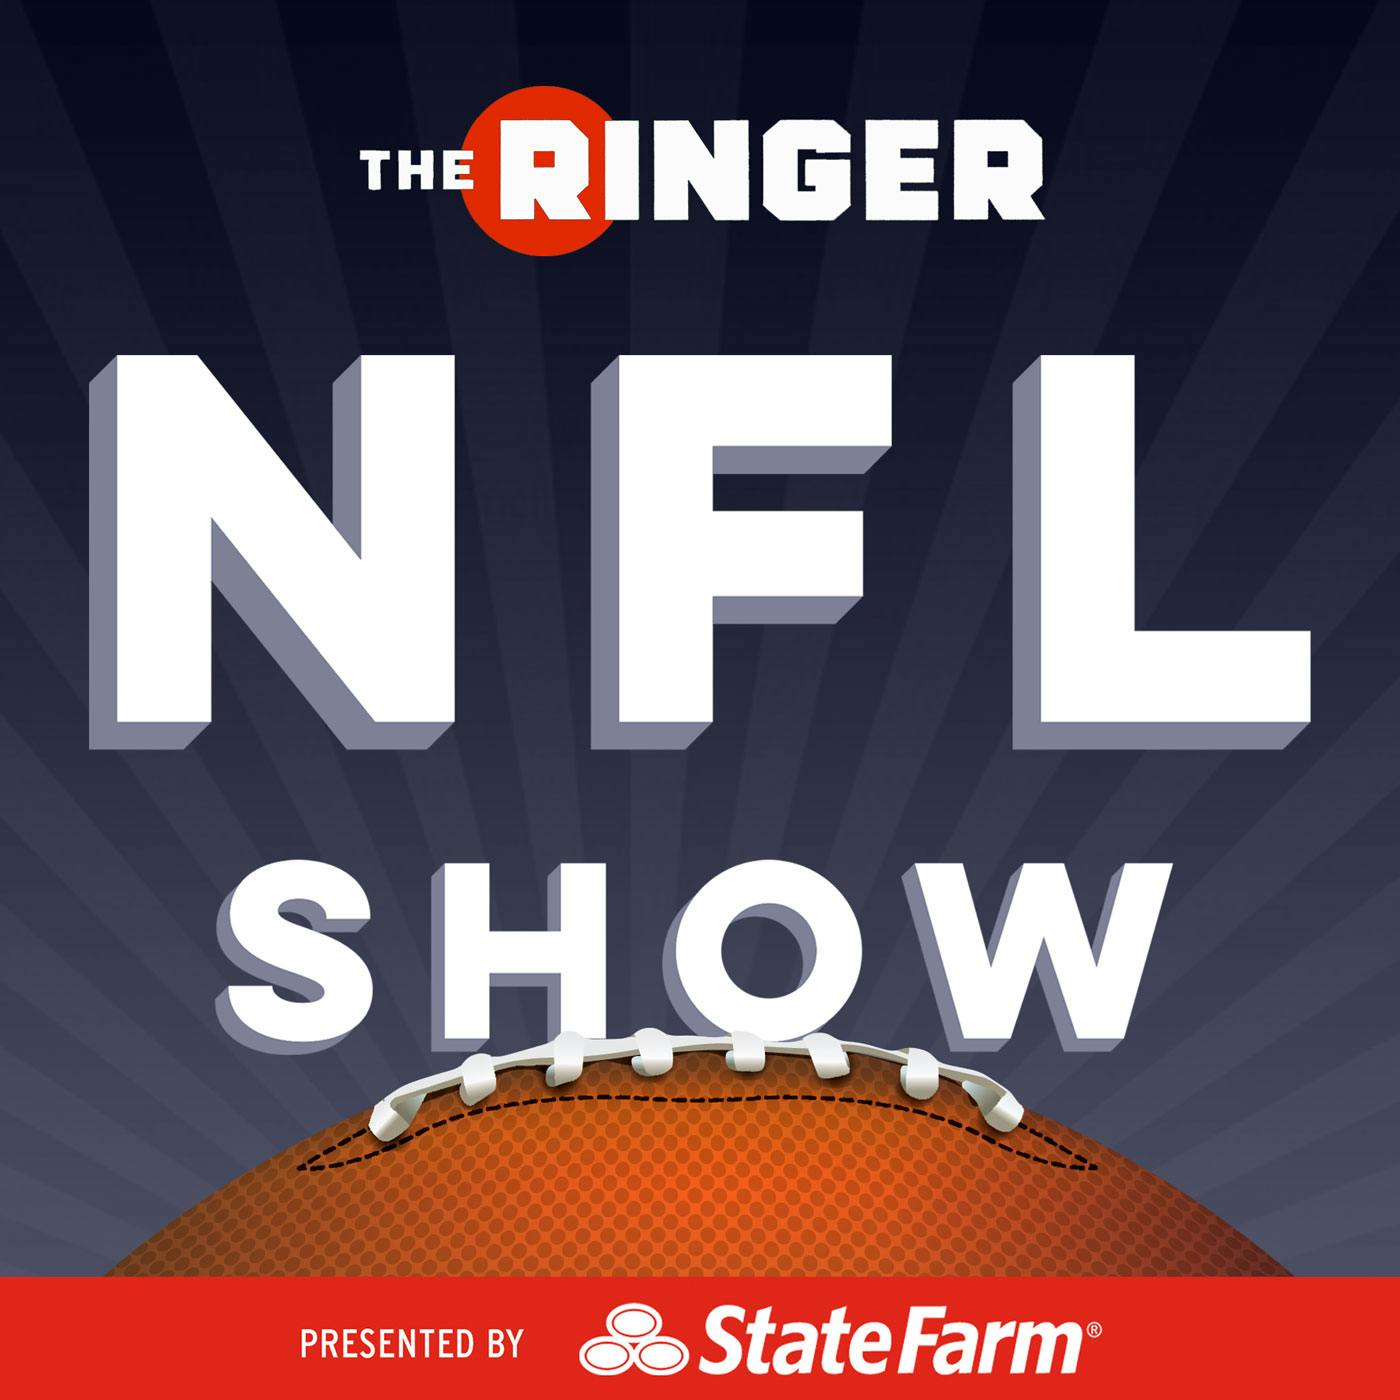 Can the Steelers Go 16-0? Plus: Brees vs. Brady, and What Antonio Brown Brings to the Bucs. | The Ringer NFL Show